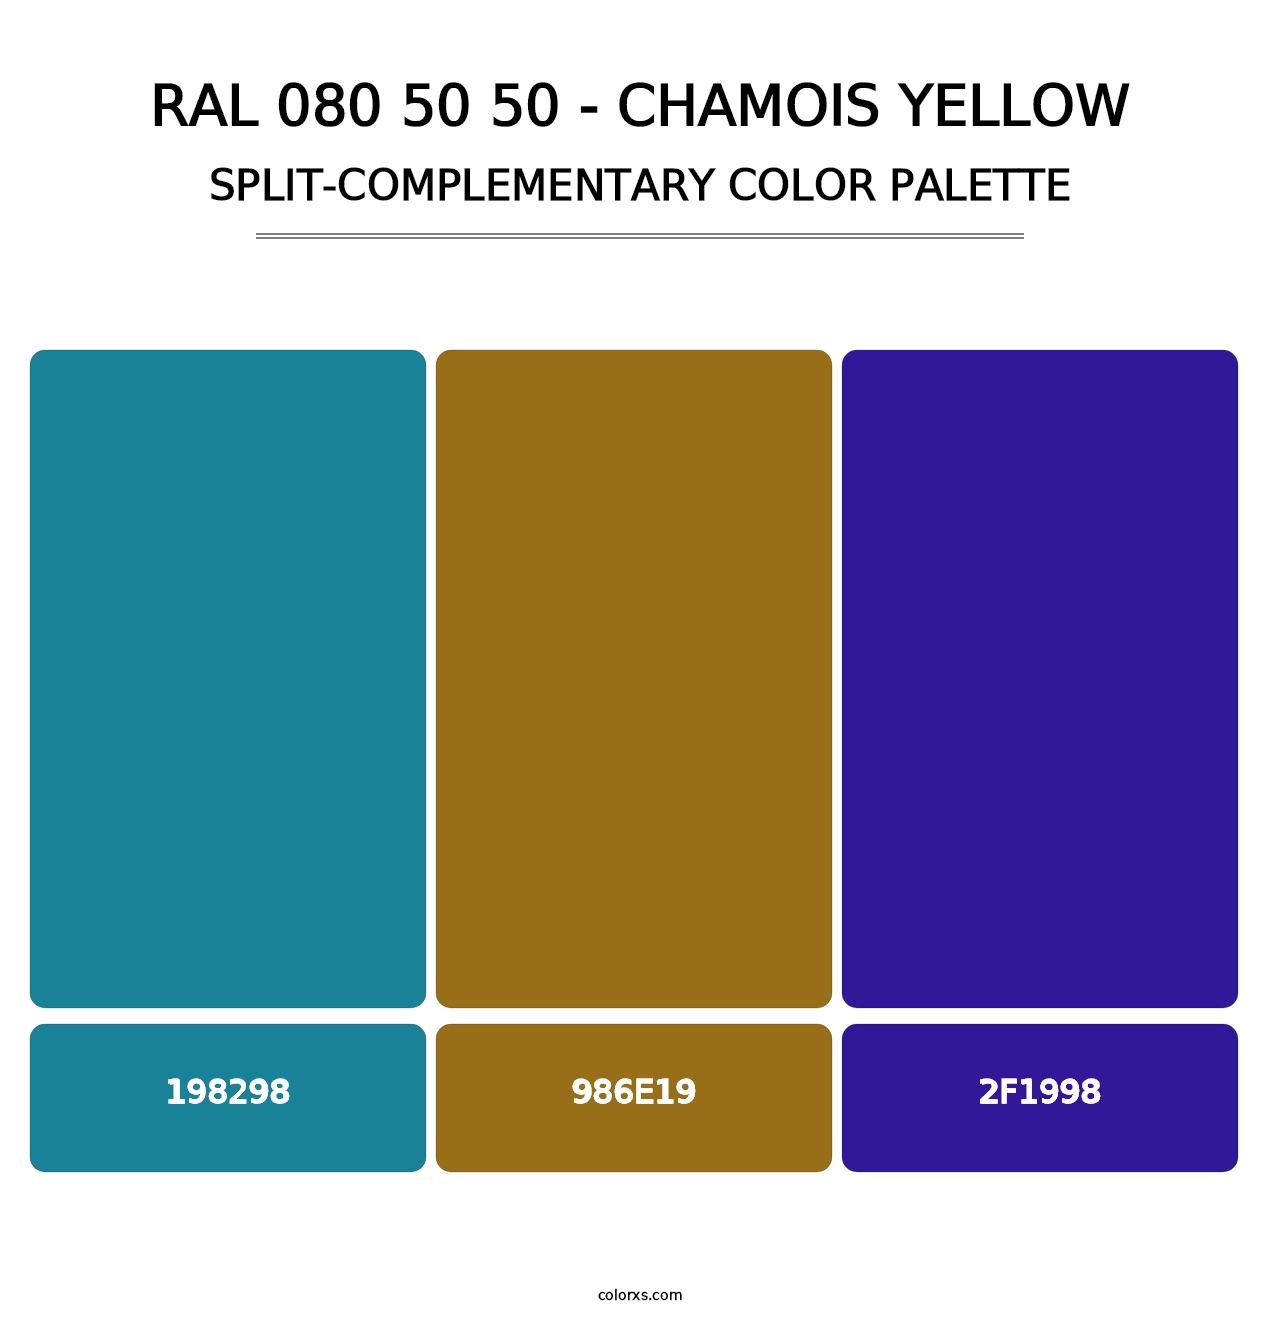 RAL 080 50 50 - Chamois Yellow - Split-Complementary Color Palette